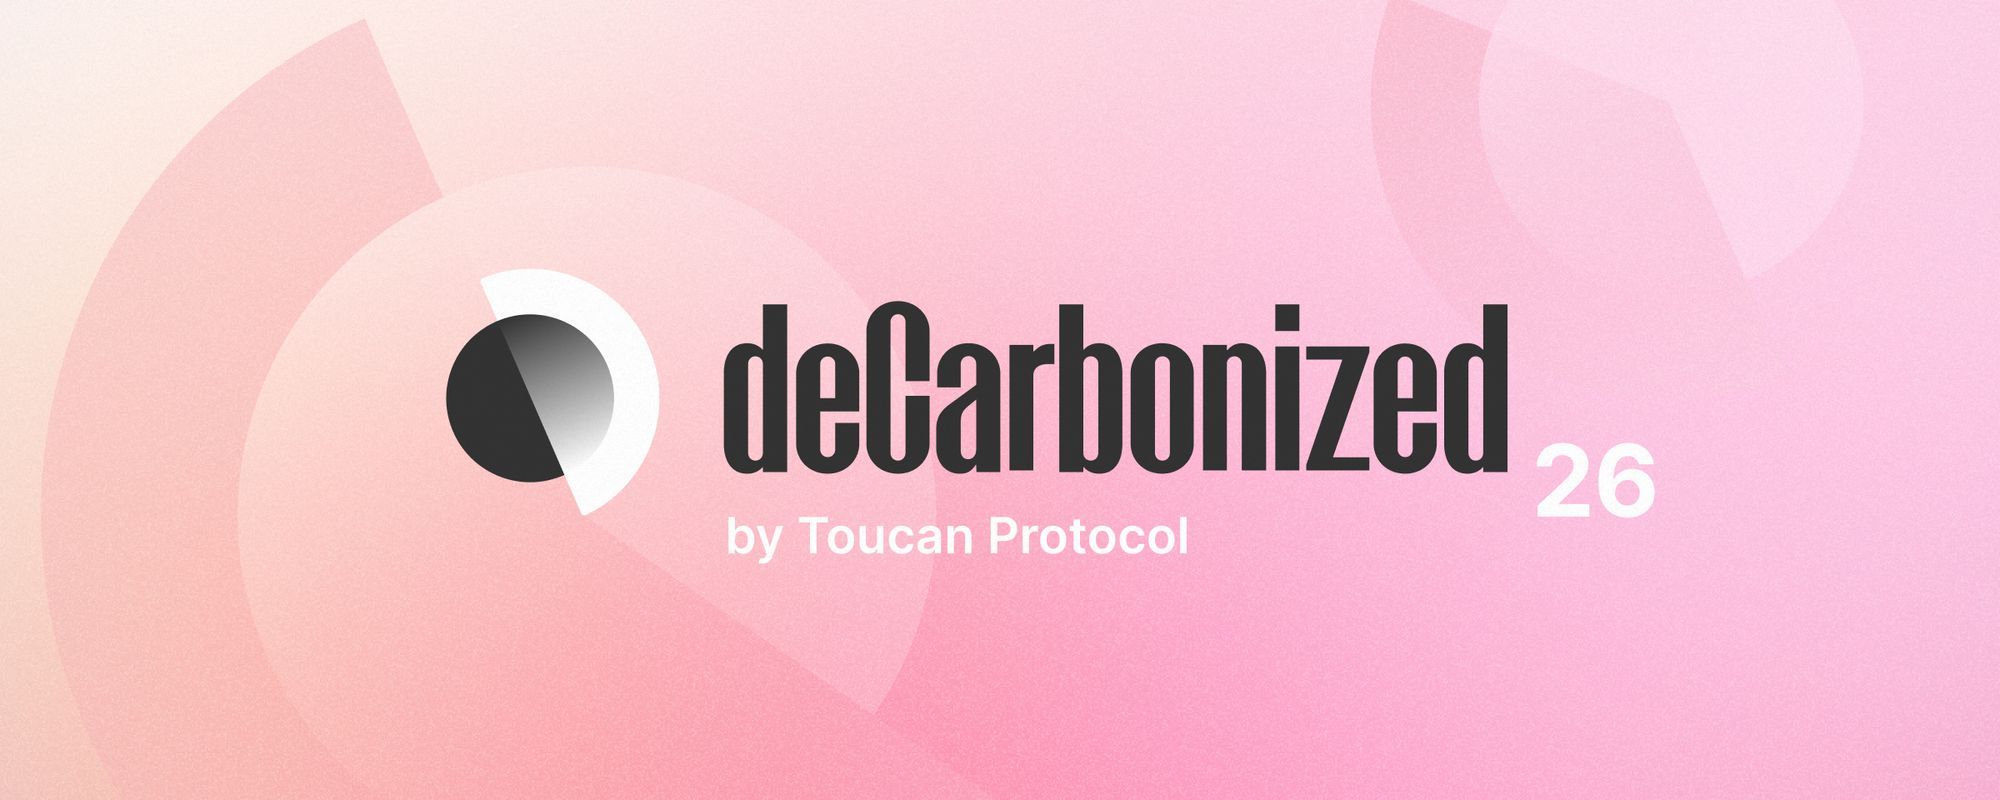 deCarbonized #26: Verra  tokenisation update; Ensuring quality of VCM operation; Scaling long-term CDR